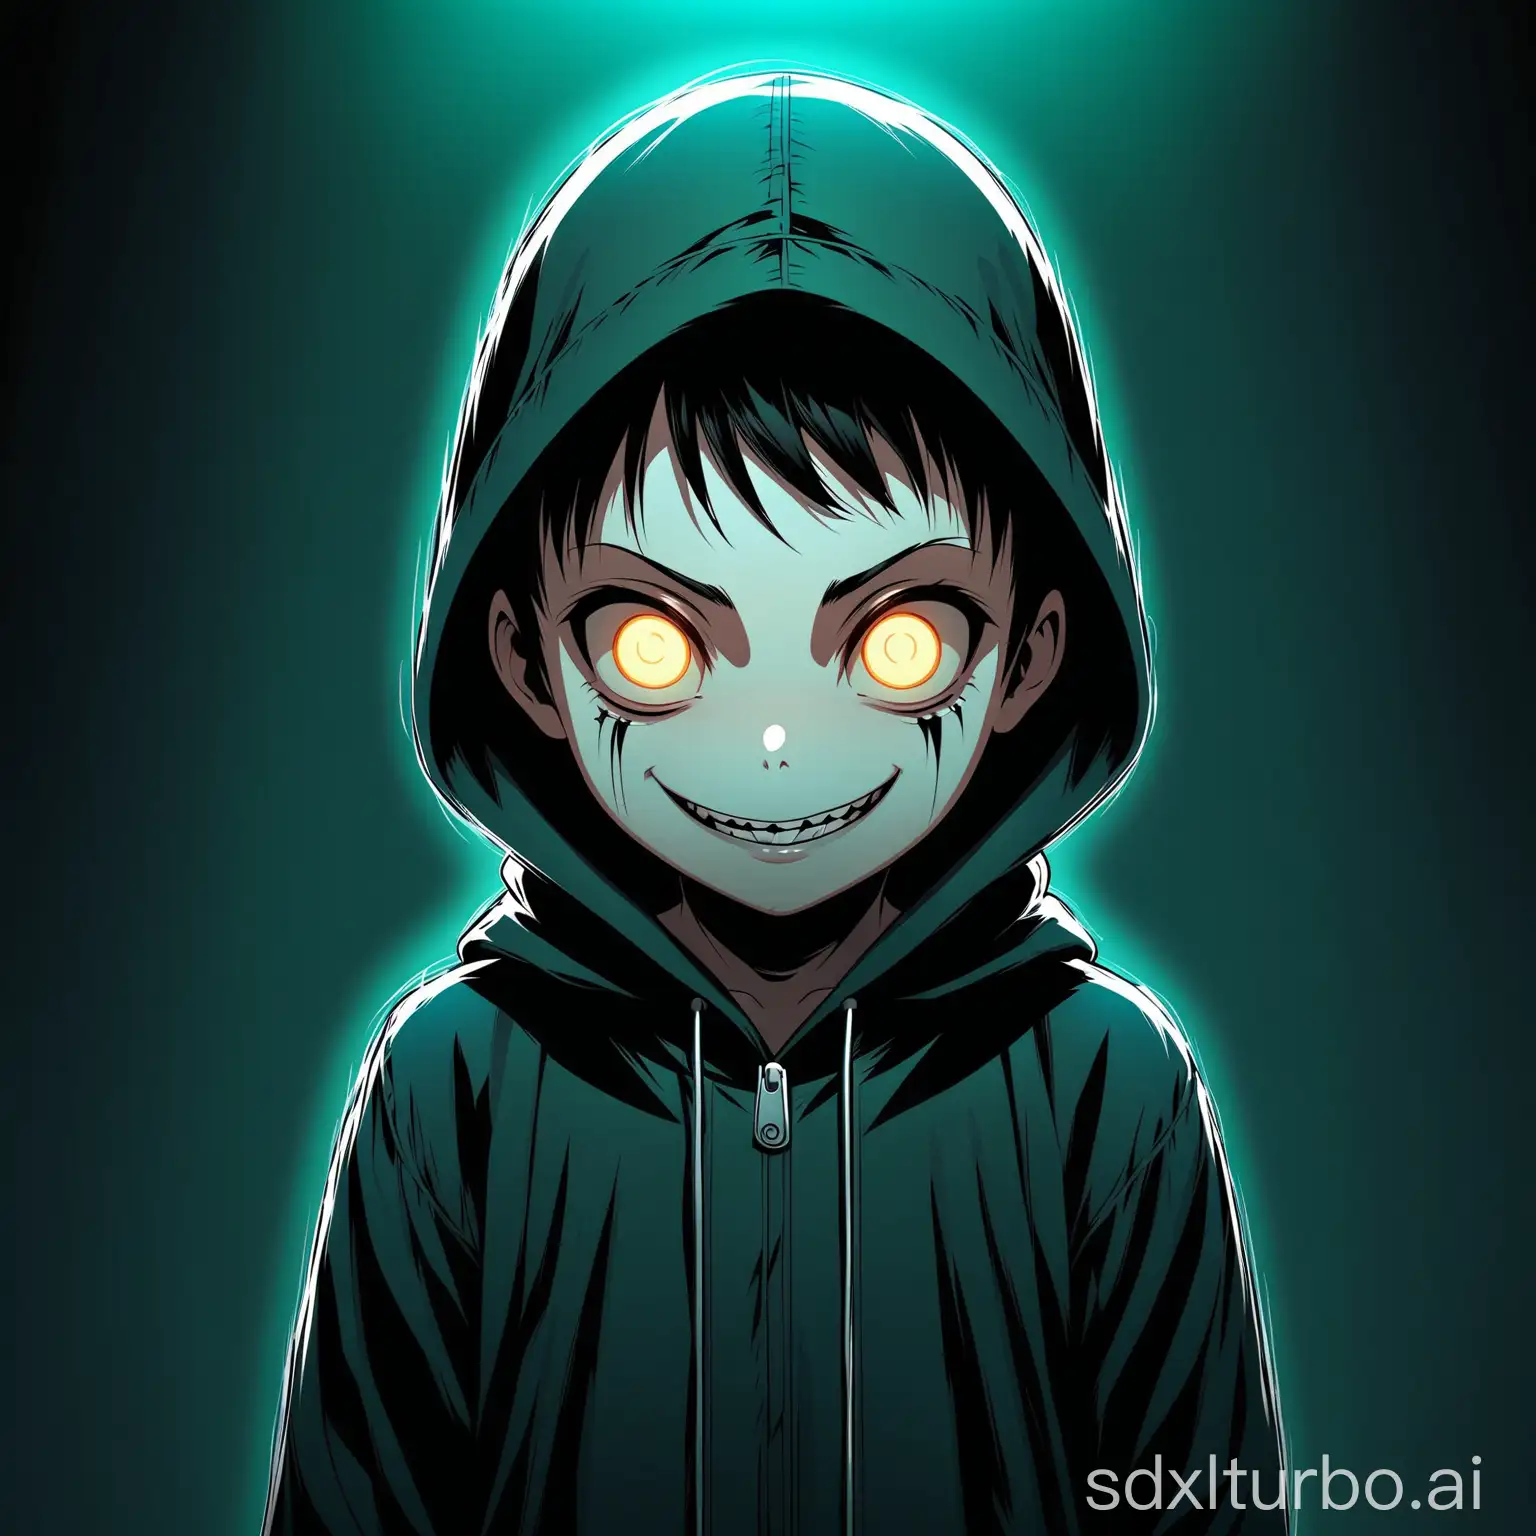 a little boy kid with creepy smile and eyes.dark and scary